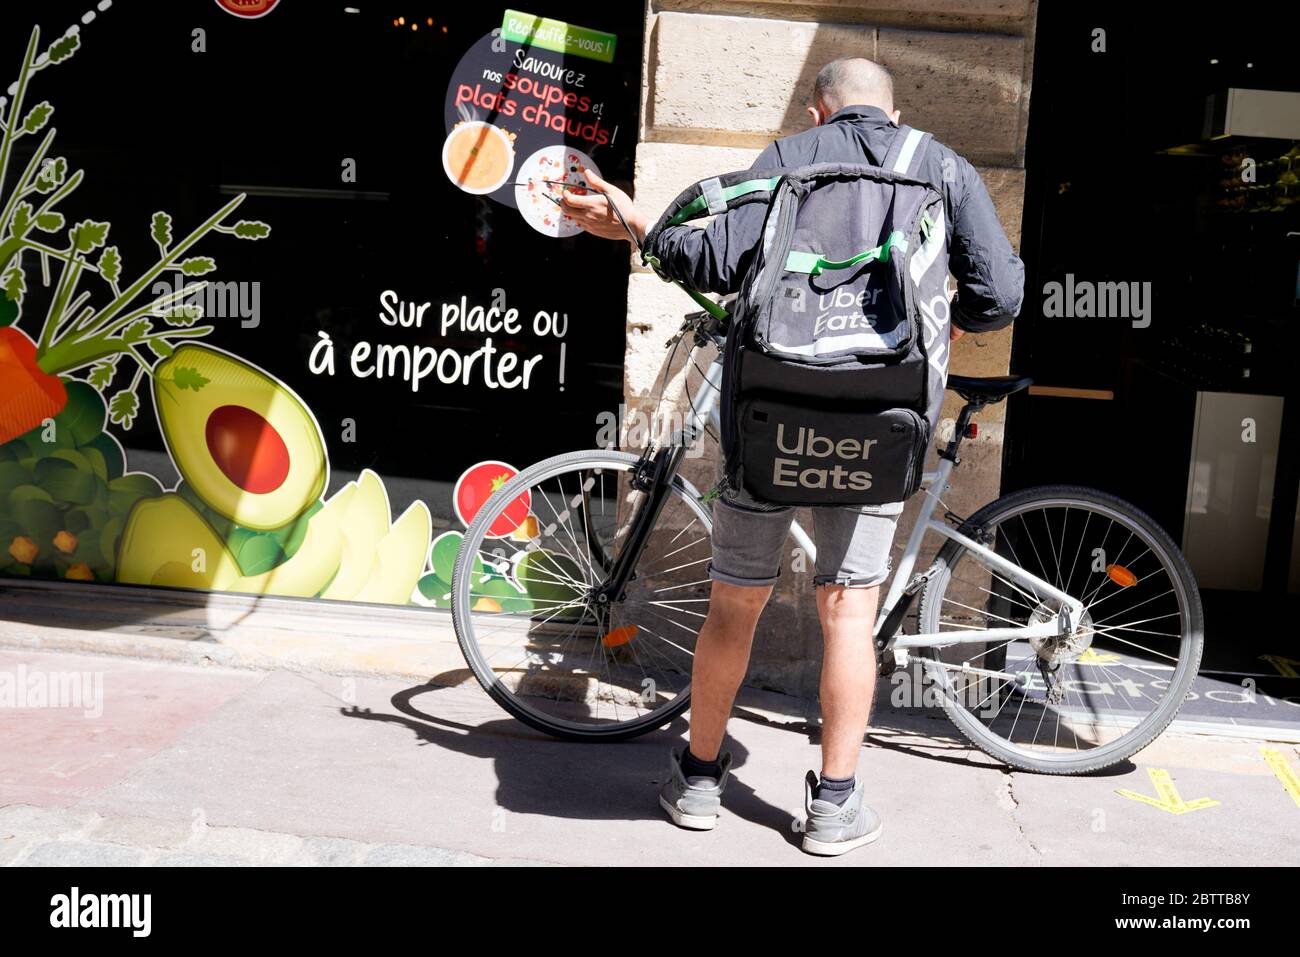 Bordeaux , Aquitaine / France - 05 05 2020 : Uber eats bike delivery man with backpack cycle Stock Photo